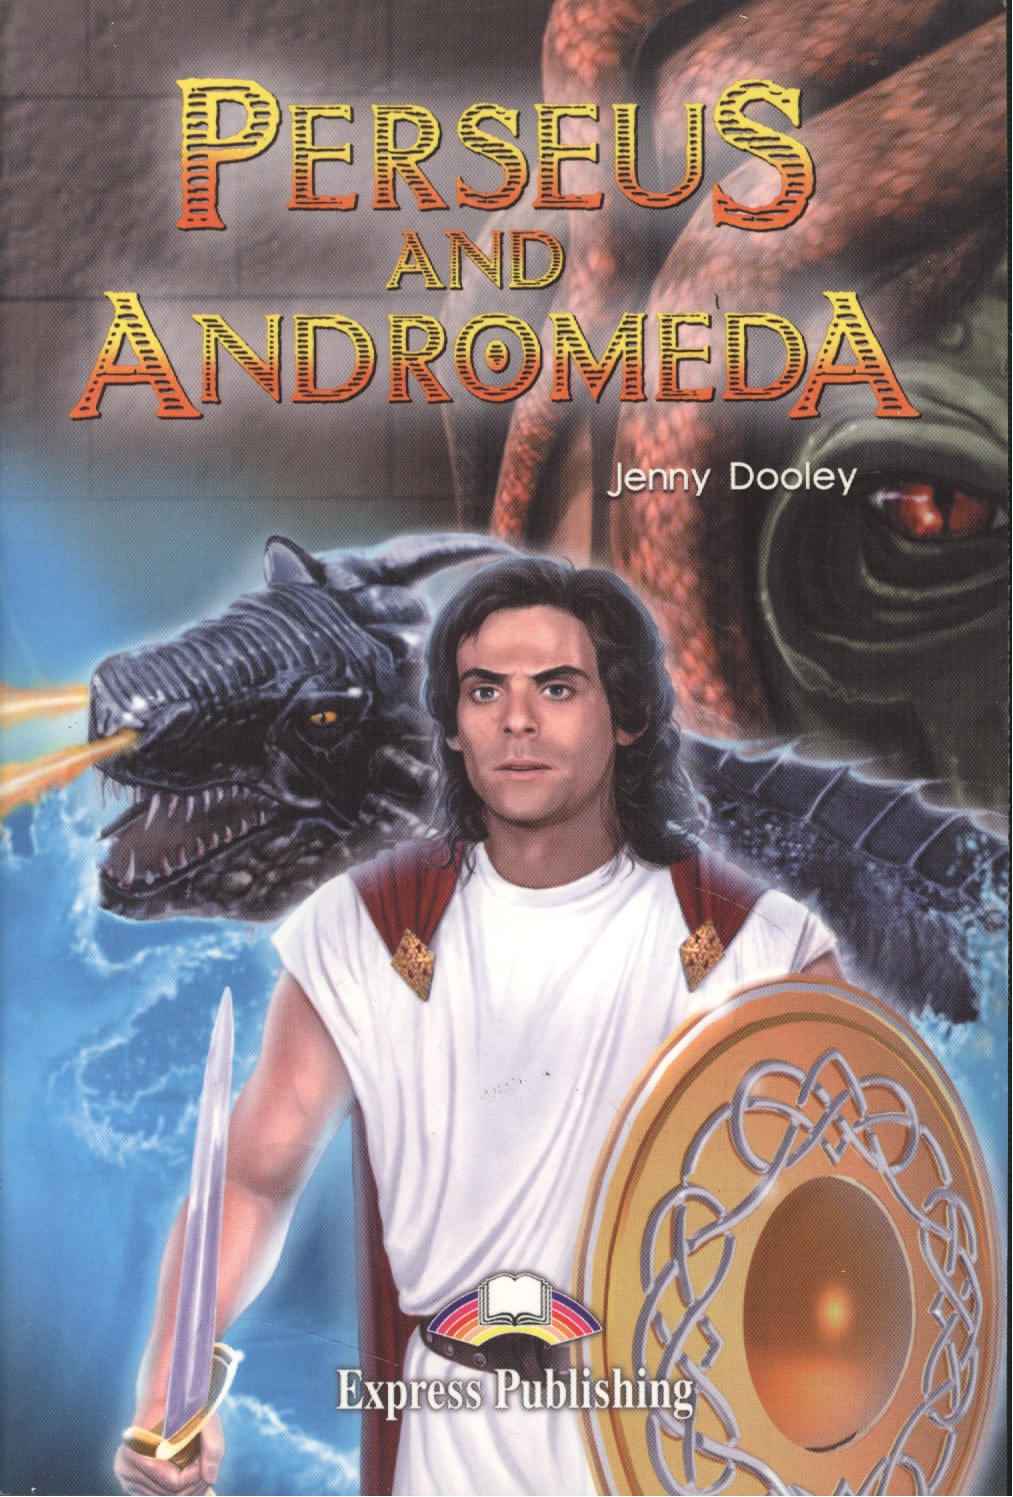 dooley j perseus and andromeda activity book Дули Дженни Perseus and Andromeda (м) Dooley